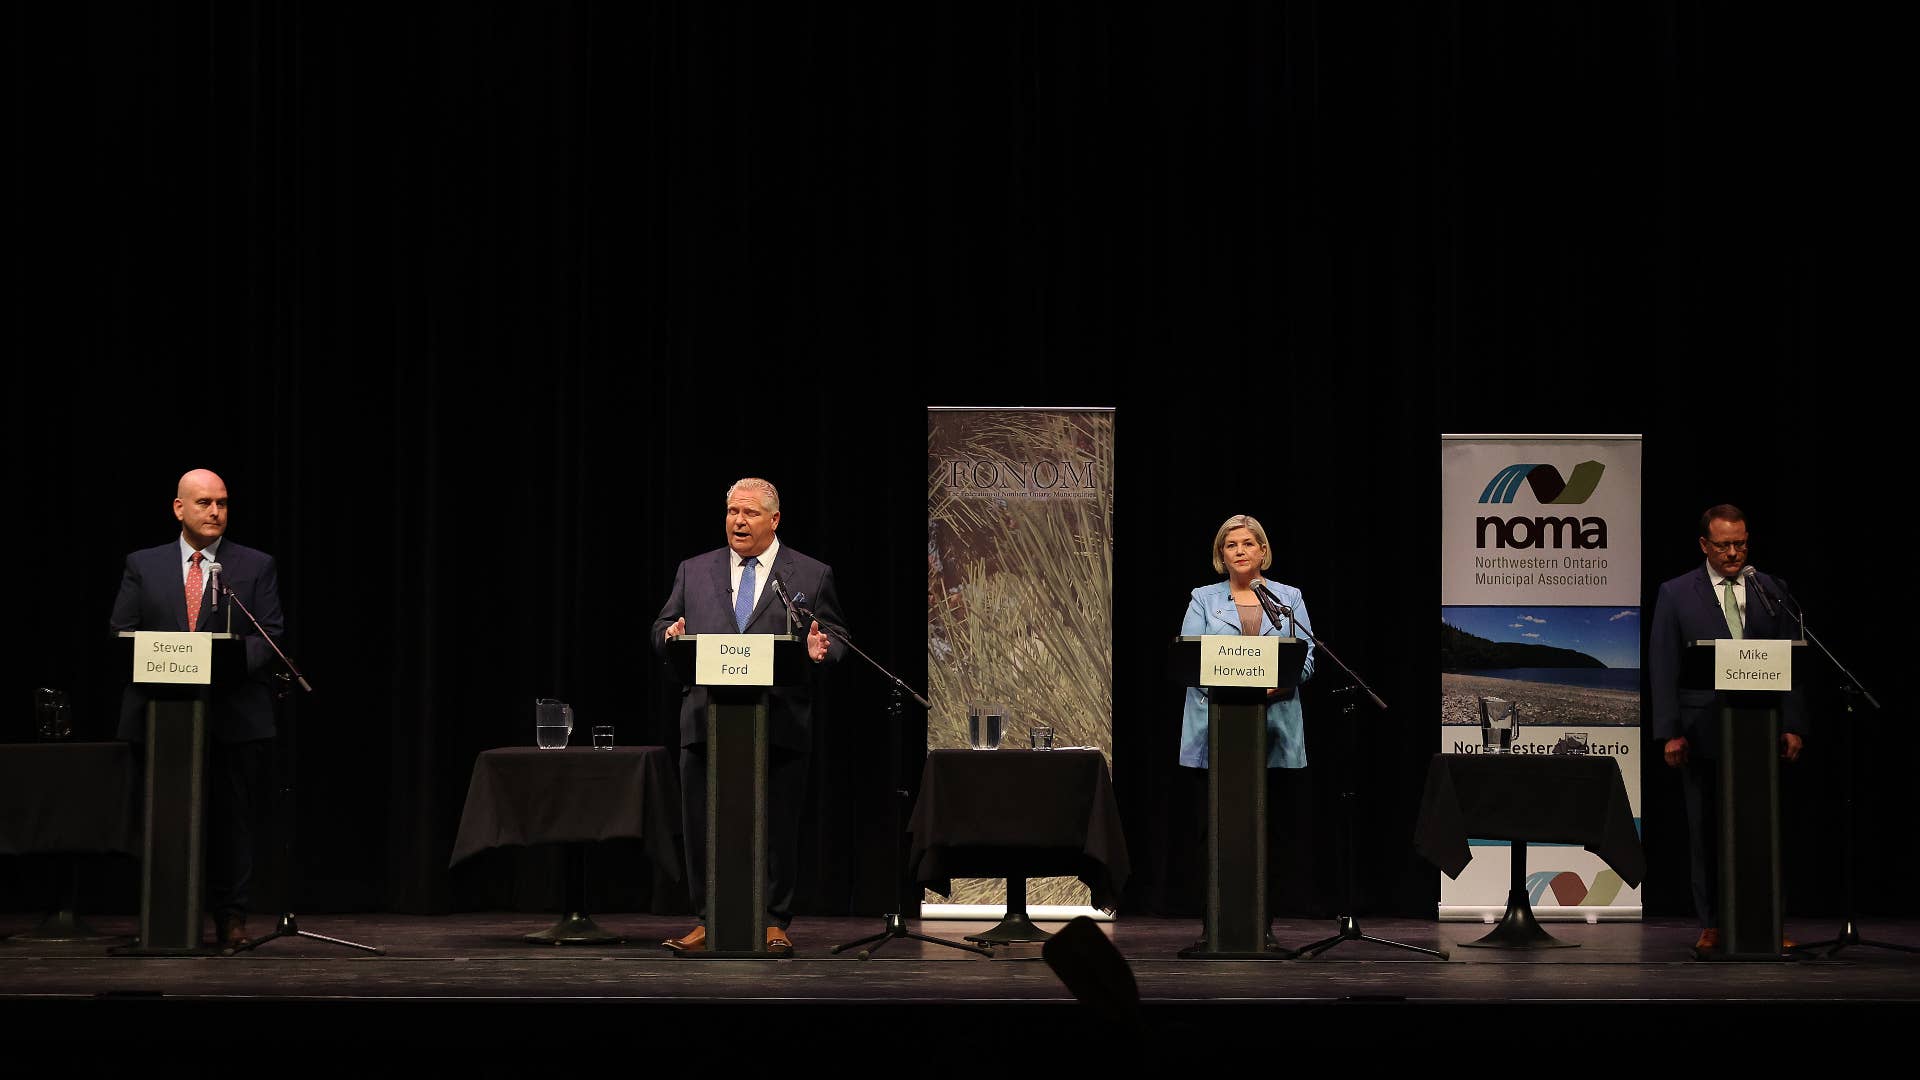 From left to right: Steven Del Duca, Doug Ford, Andrea Horwath, and Mike Schreiner debating on stage